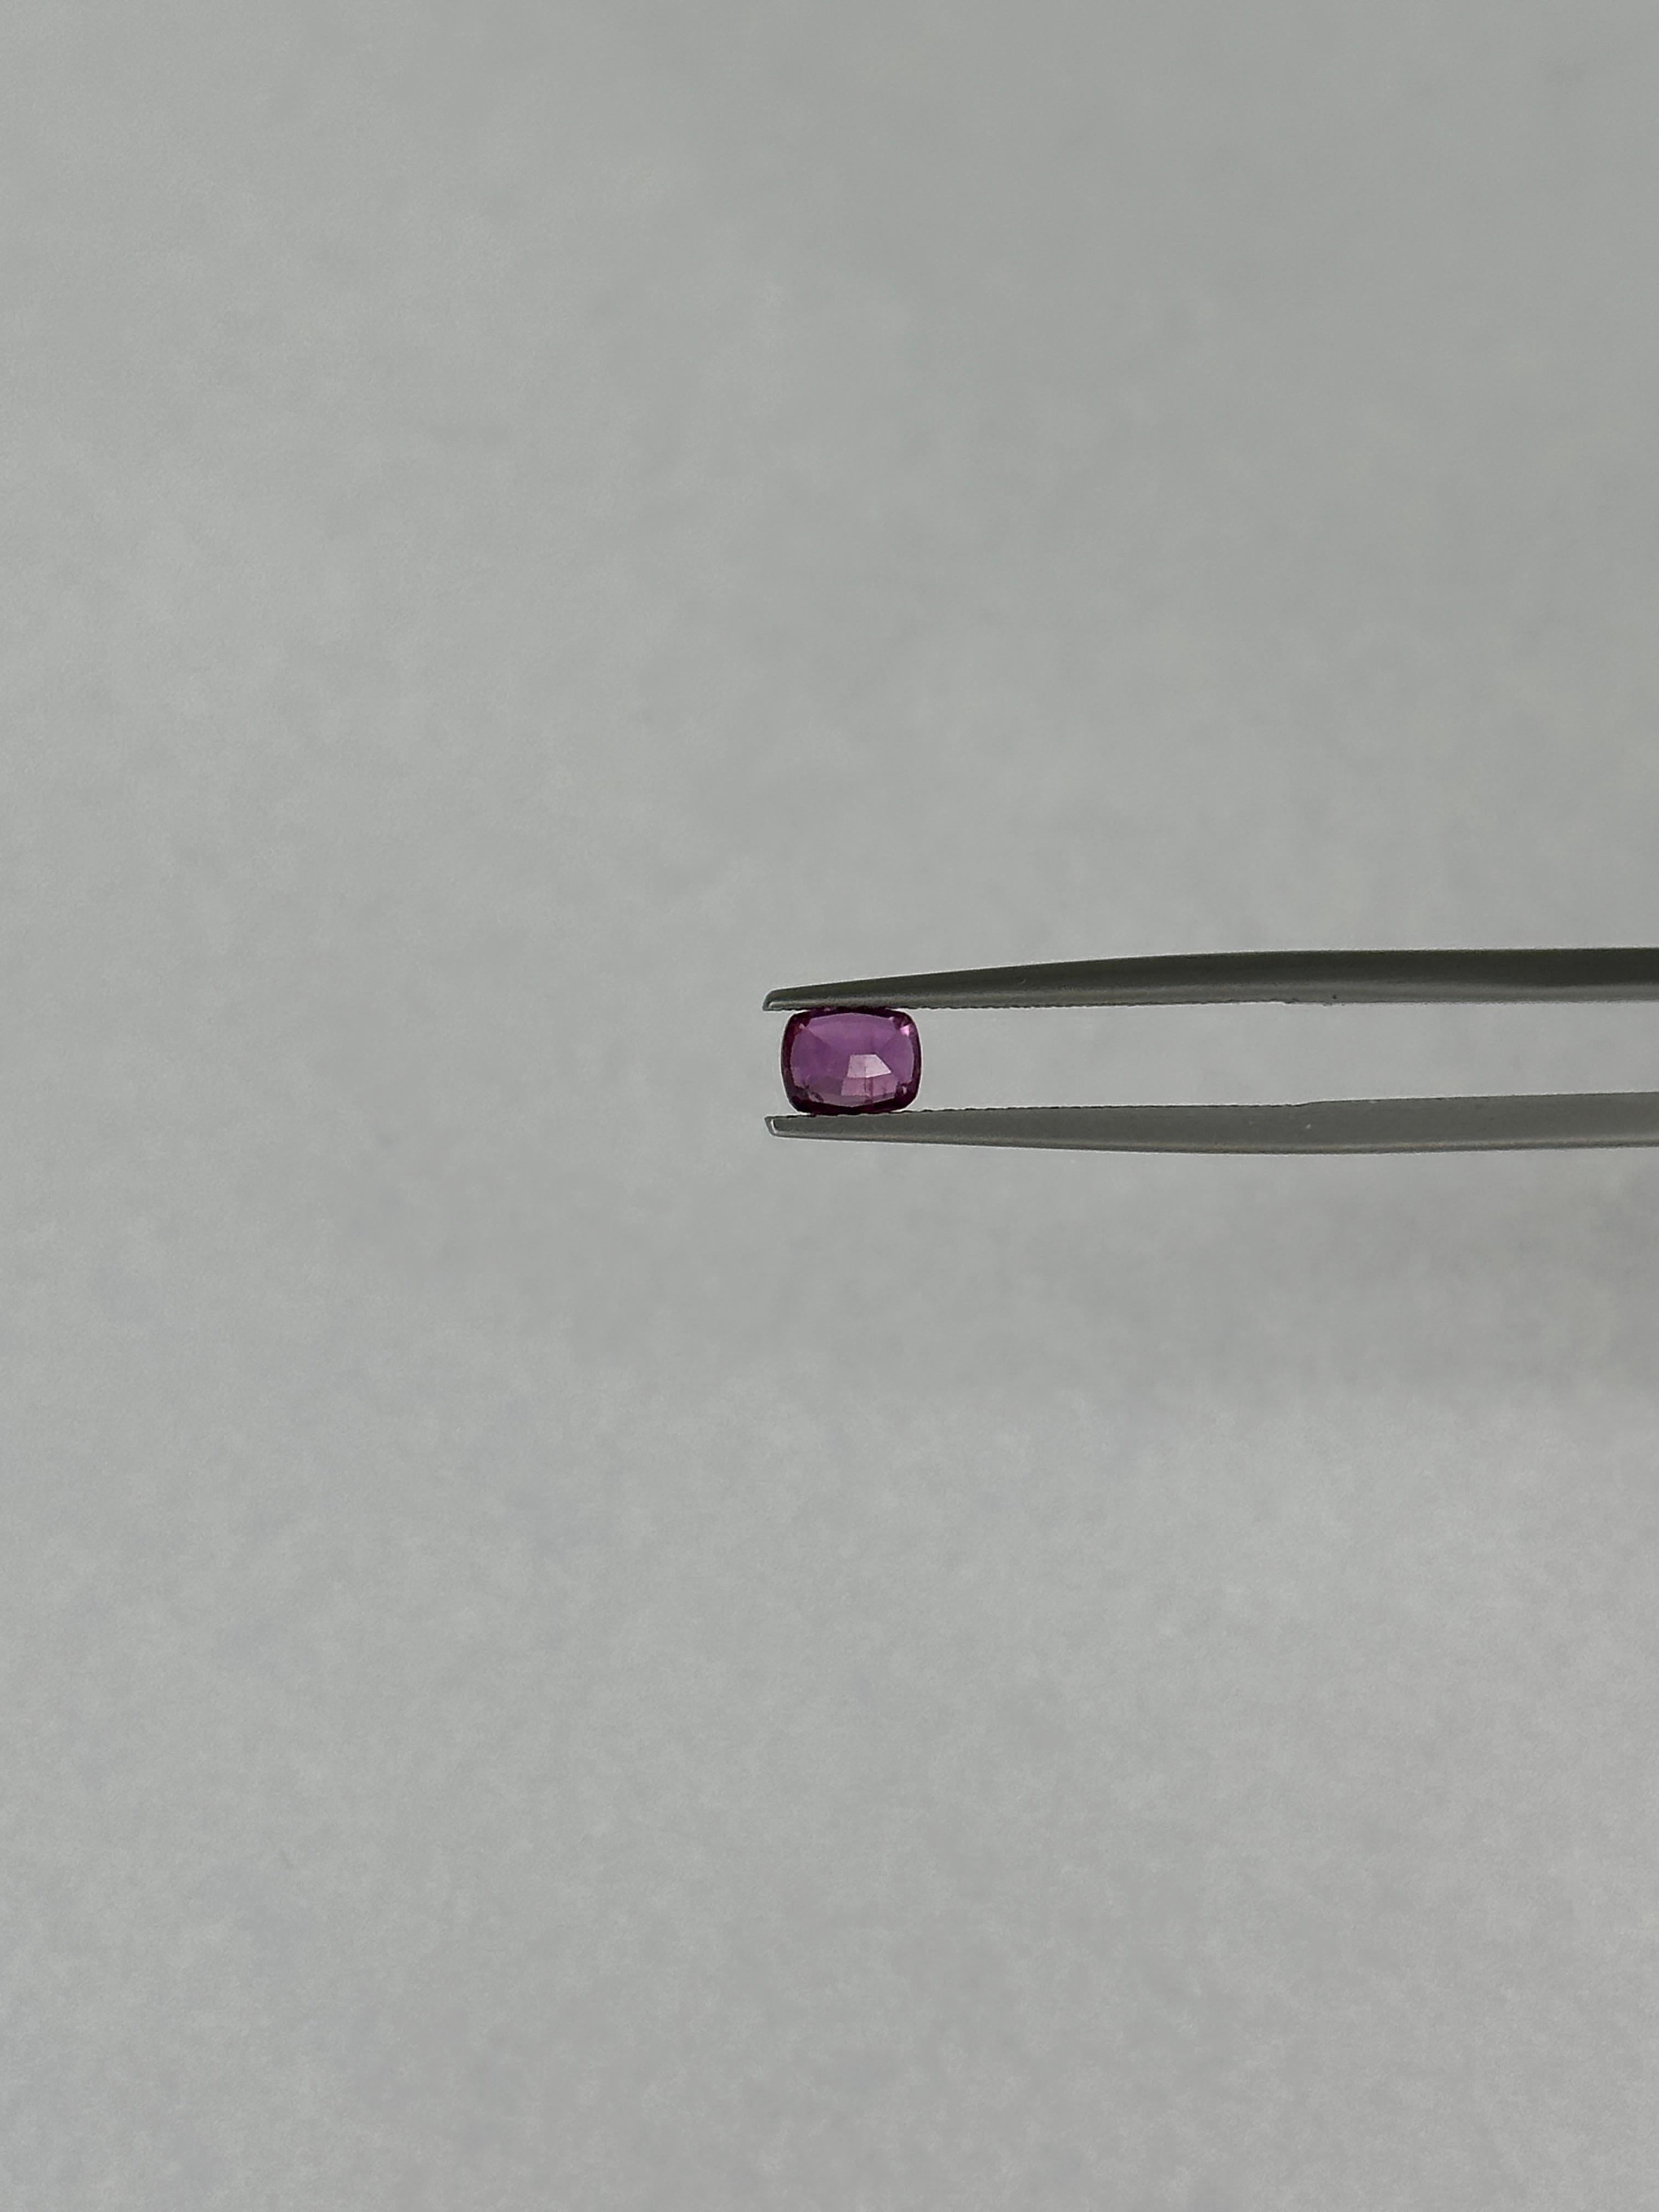 0.79 Carat Natural Fancy Pink Sapphire For Sale 1